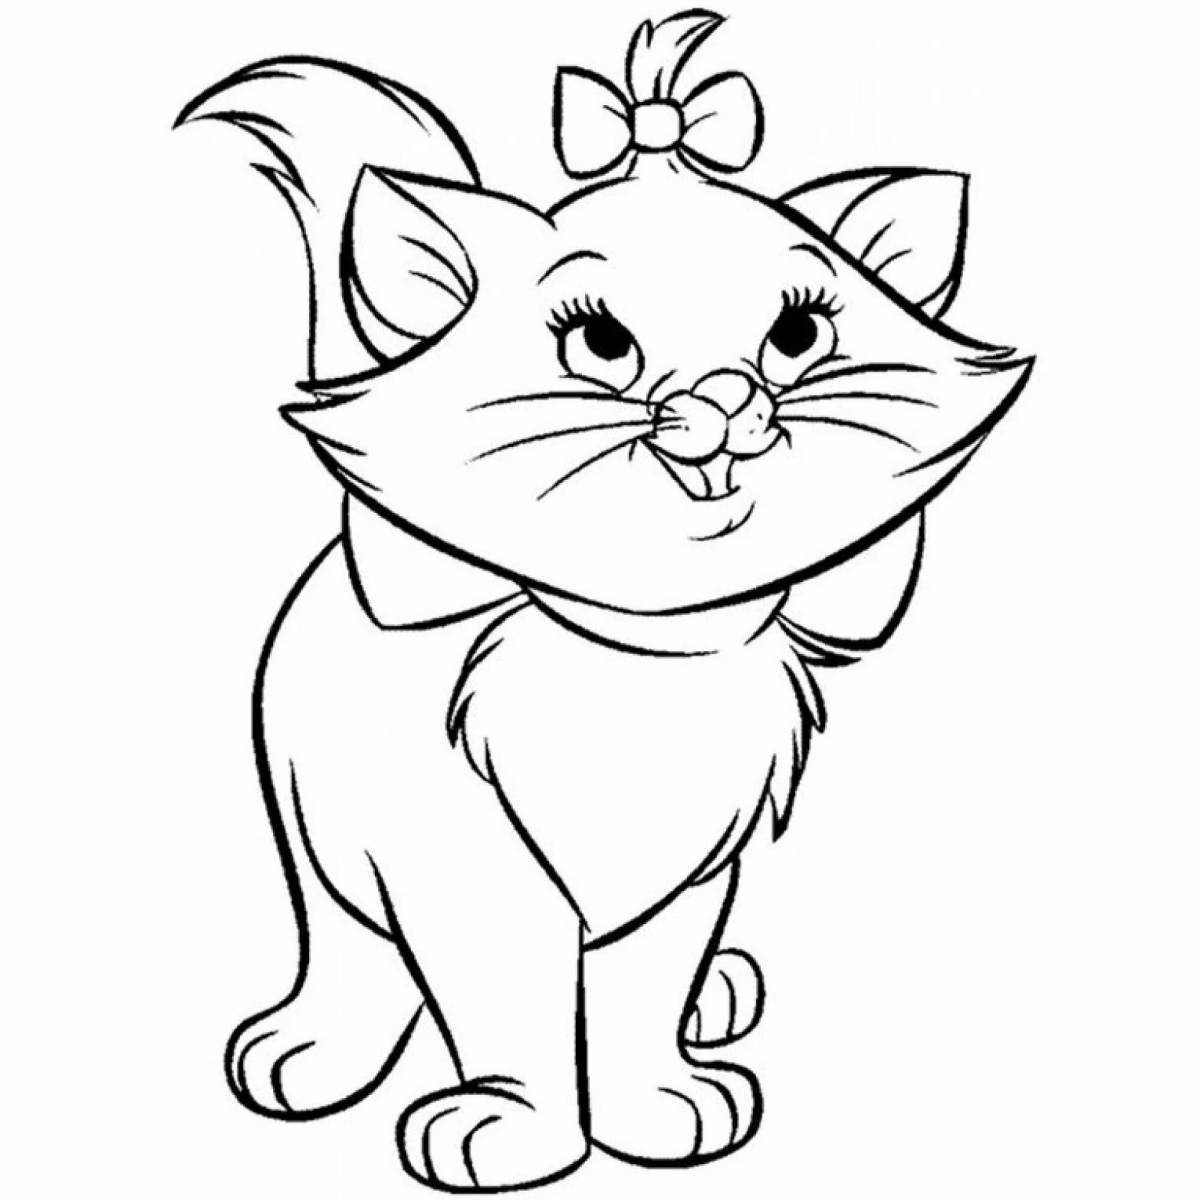 Pretty pussy coloring page for kids